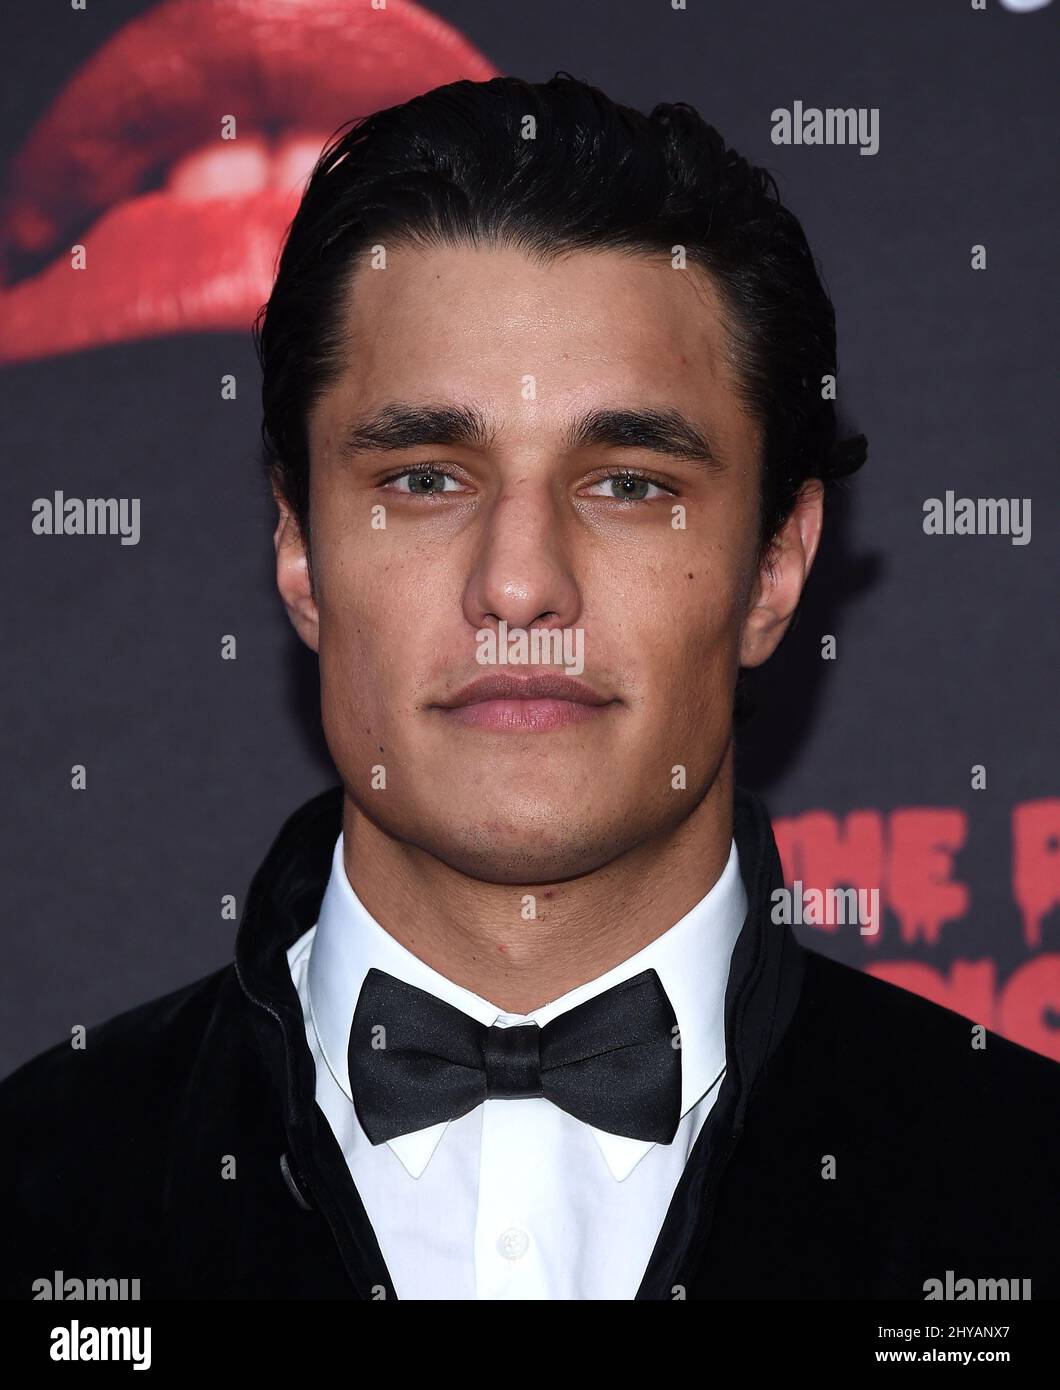 Staz Nair attending the Rocky Horror Picture Show: Let's Do The Time Warp Again Premiere held at The Roxy, in Los Angeles, California. Stock Photo